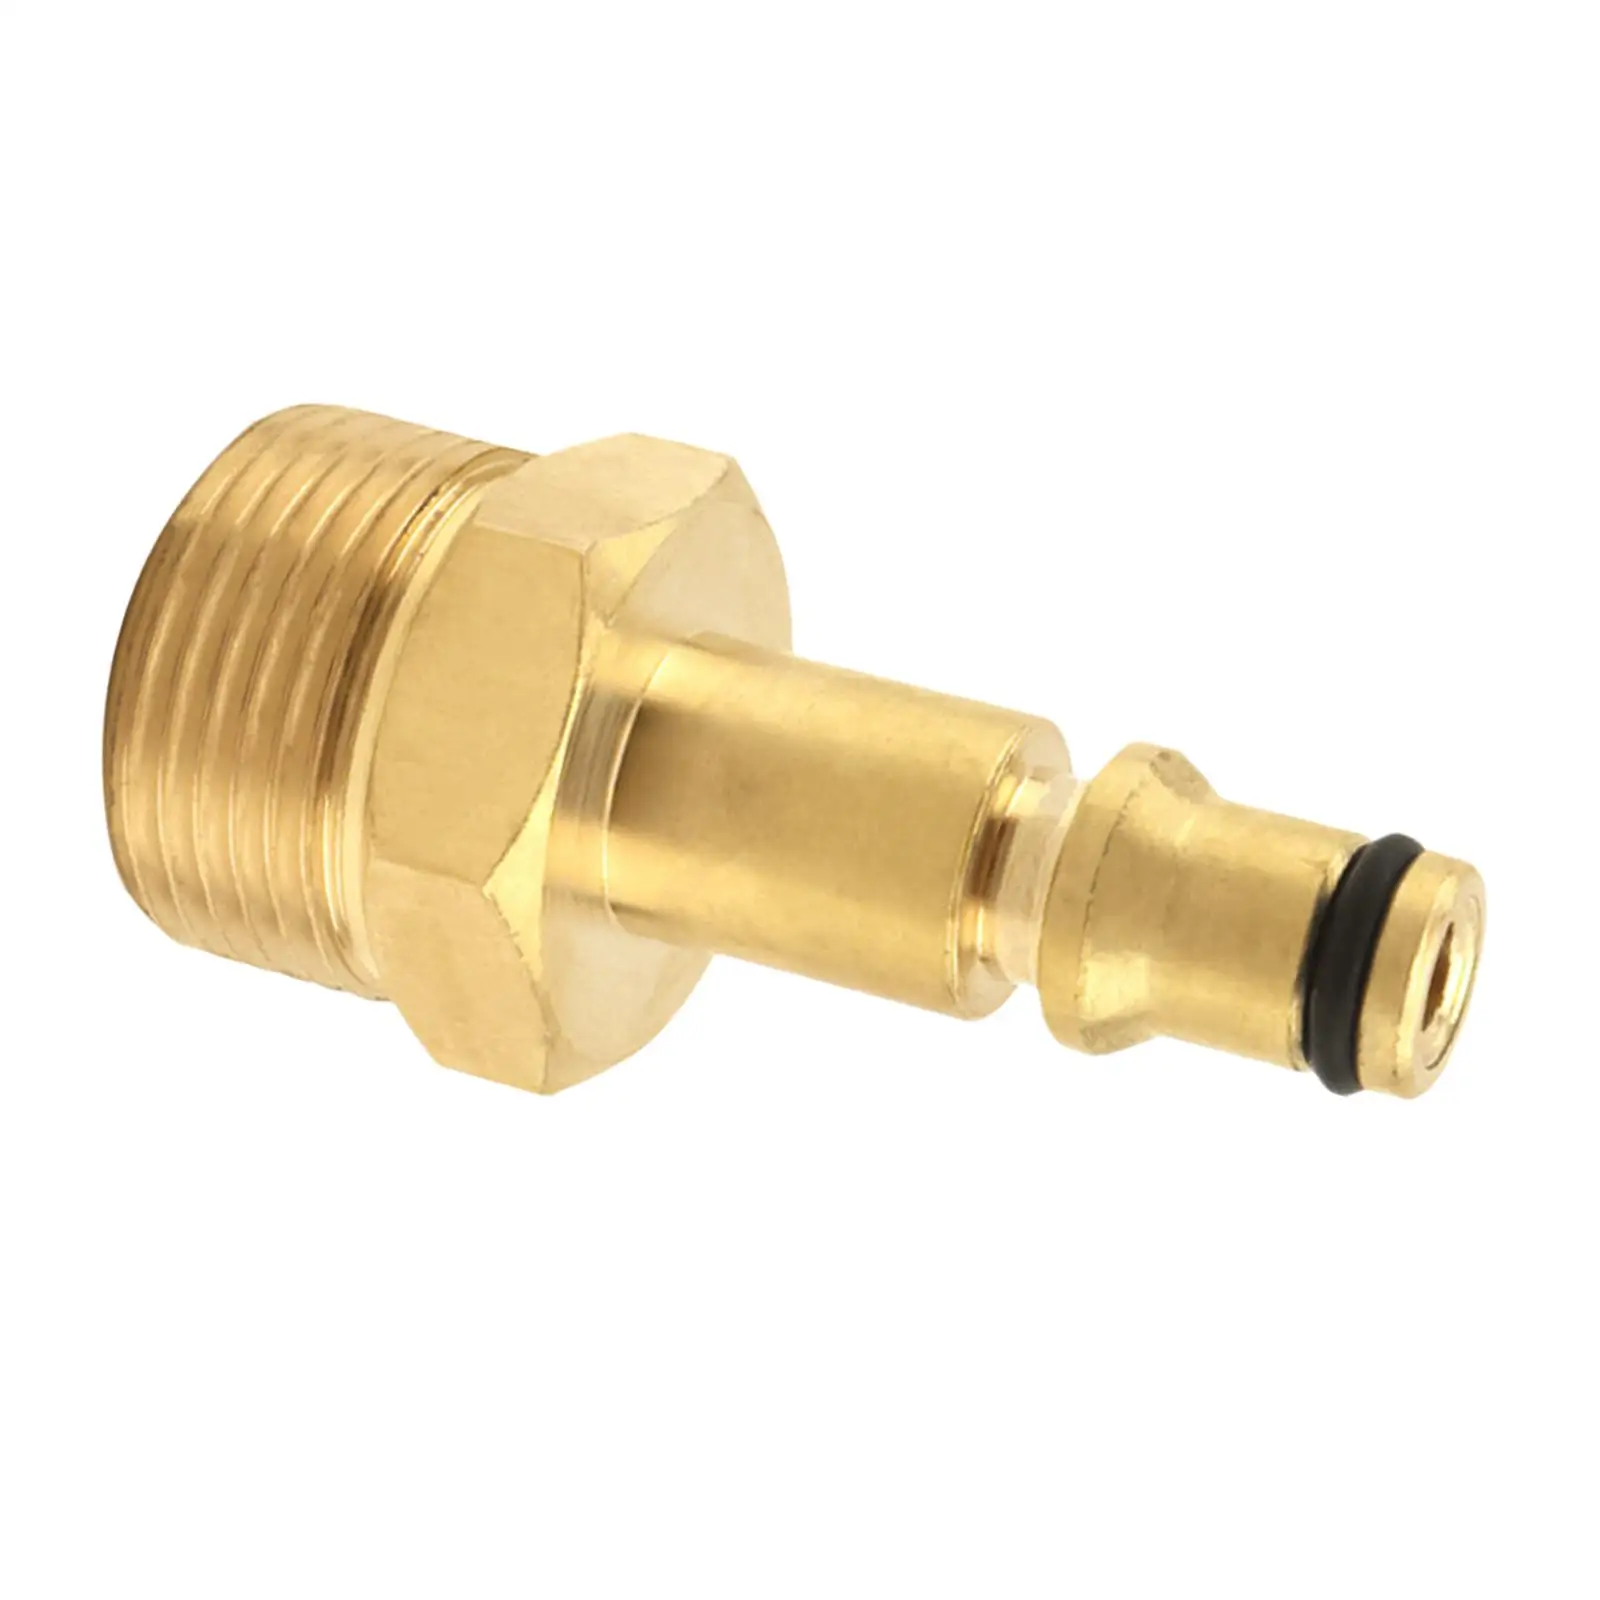 Hose Connectors Fittingsand Disconnect Hose Repair  Pressure Washer